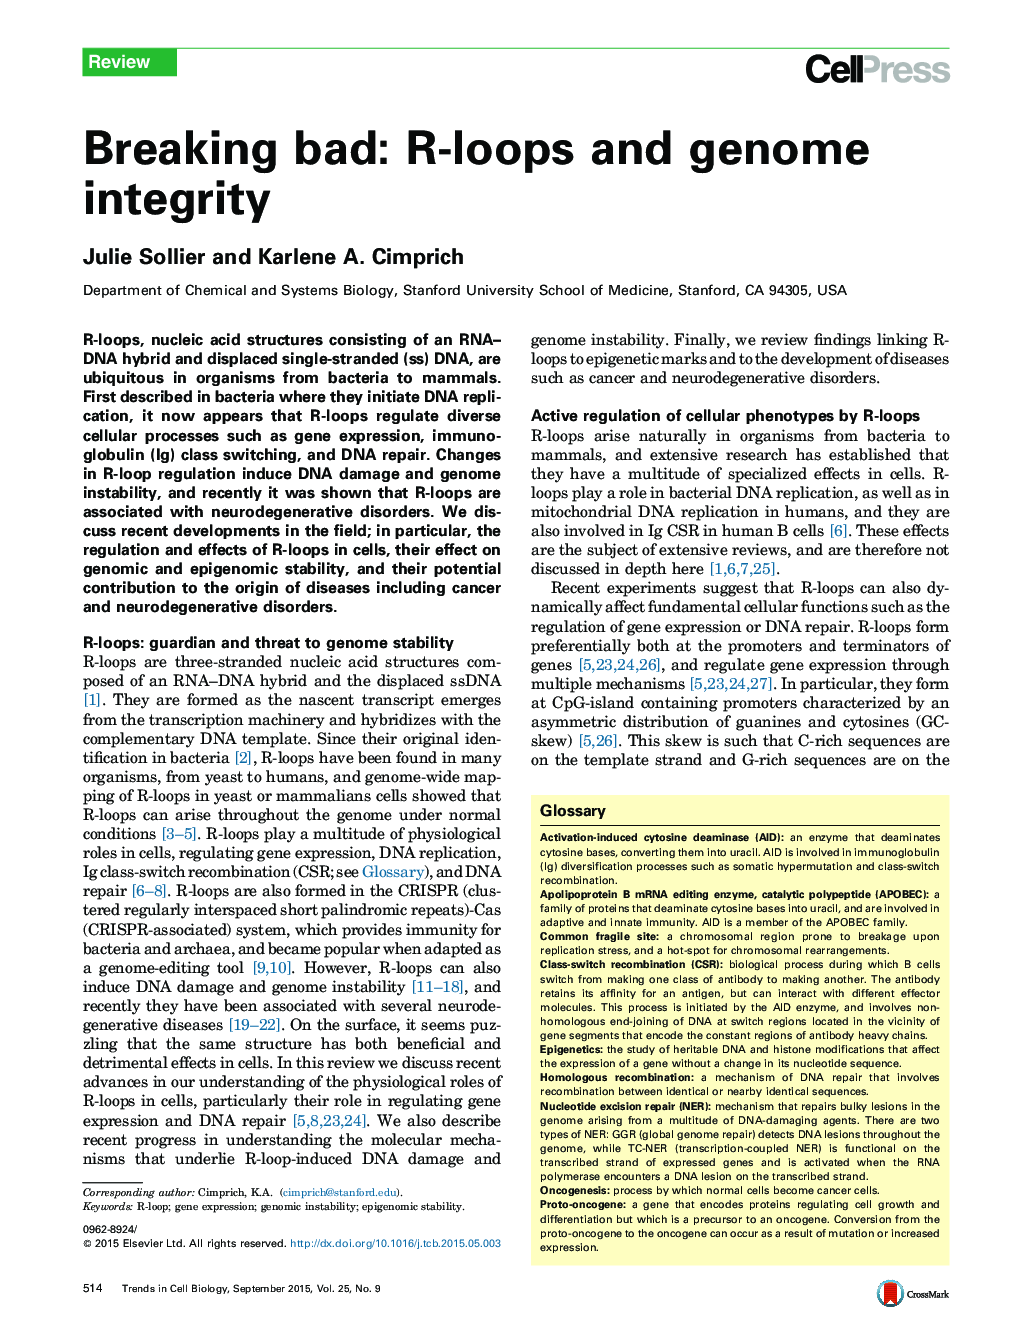 Breaking bad: R-loops and genome integrity